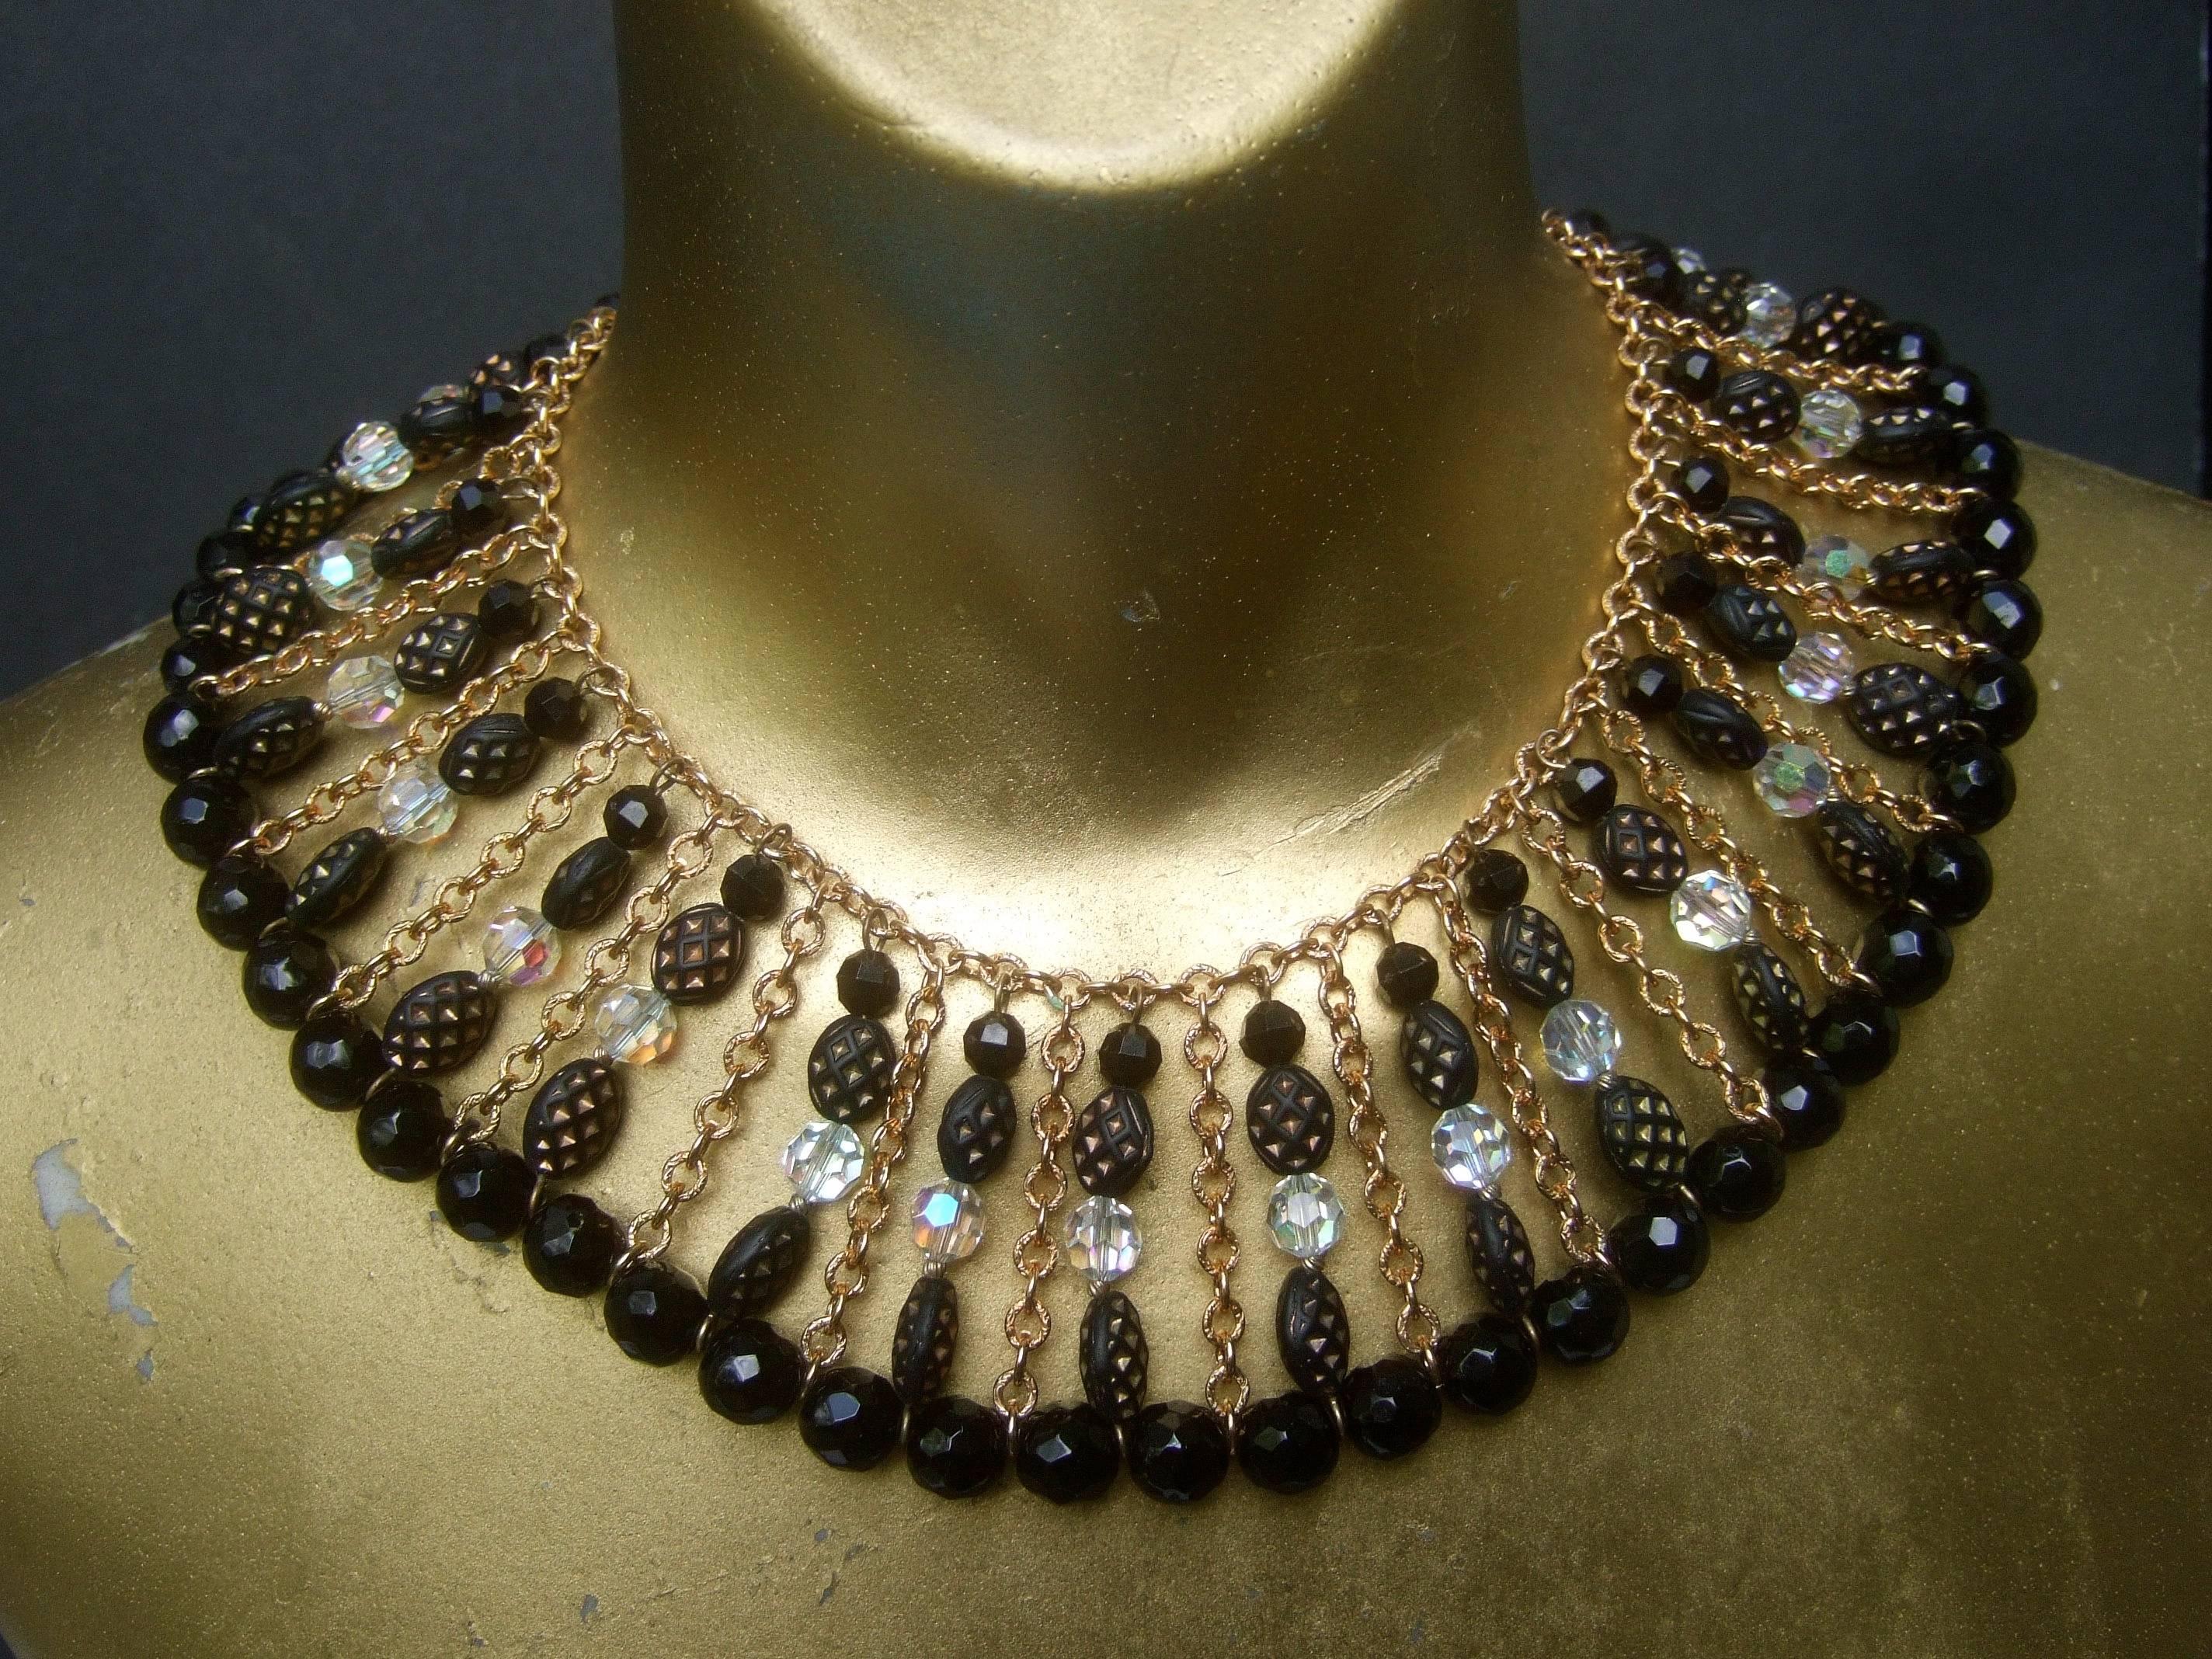 Trifari Exquisite crystal beaded parure necklace set ca 1960s 
The elegant set is designed with a jet black 
and aurora borealis faceted crystal beads combined
with textured black and gold resin beads 

The dramatic crystal beaded collar necklace